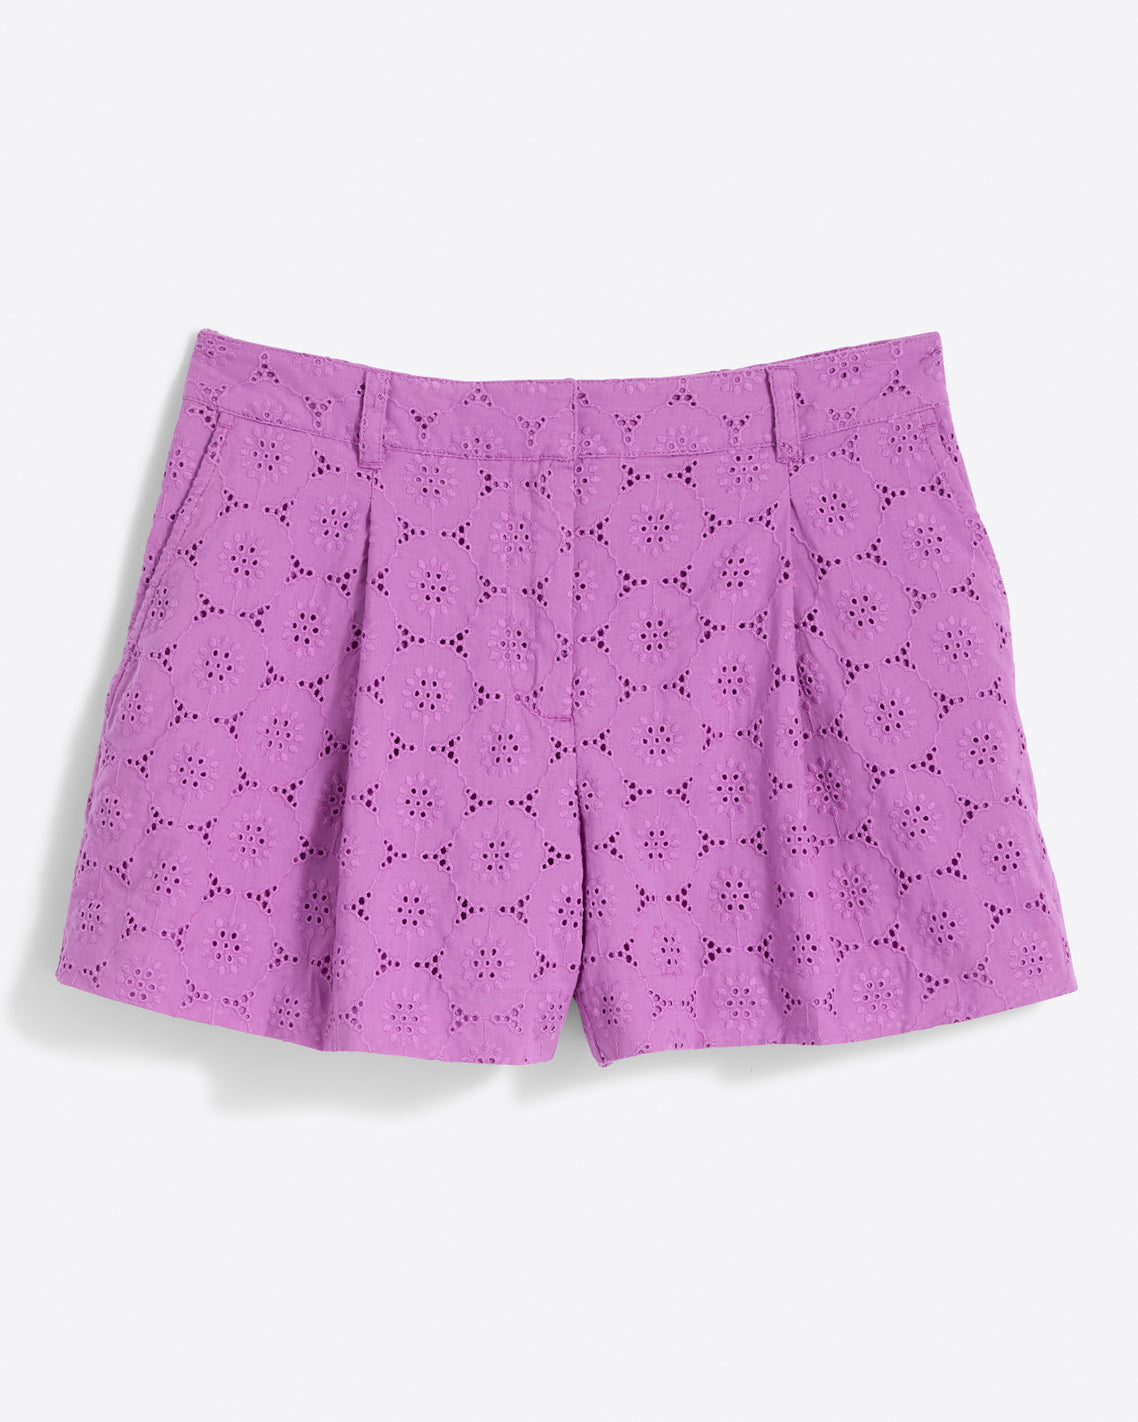 Woven Shorts in Eyelet